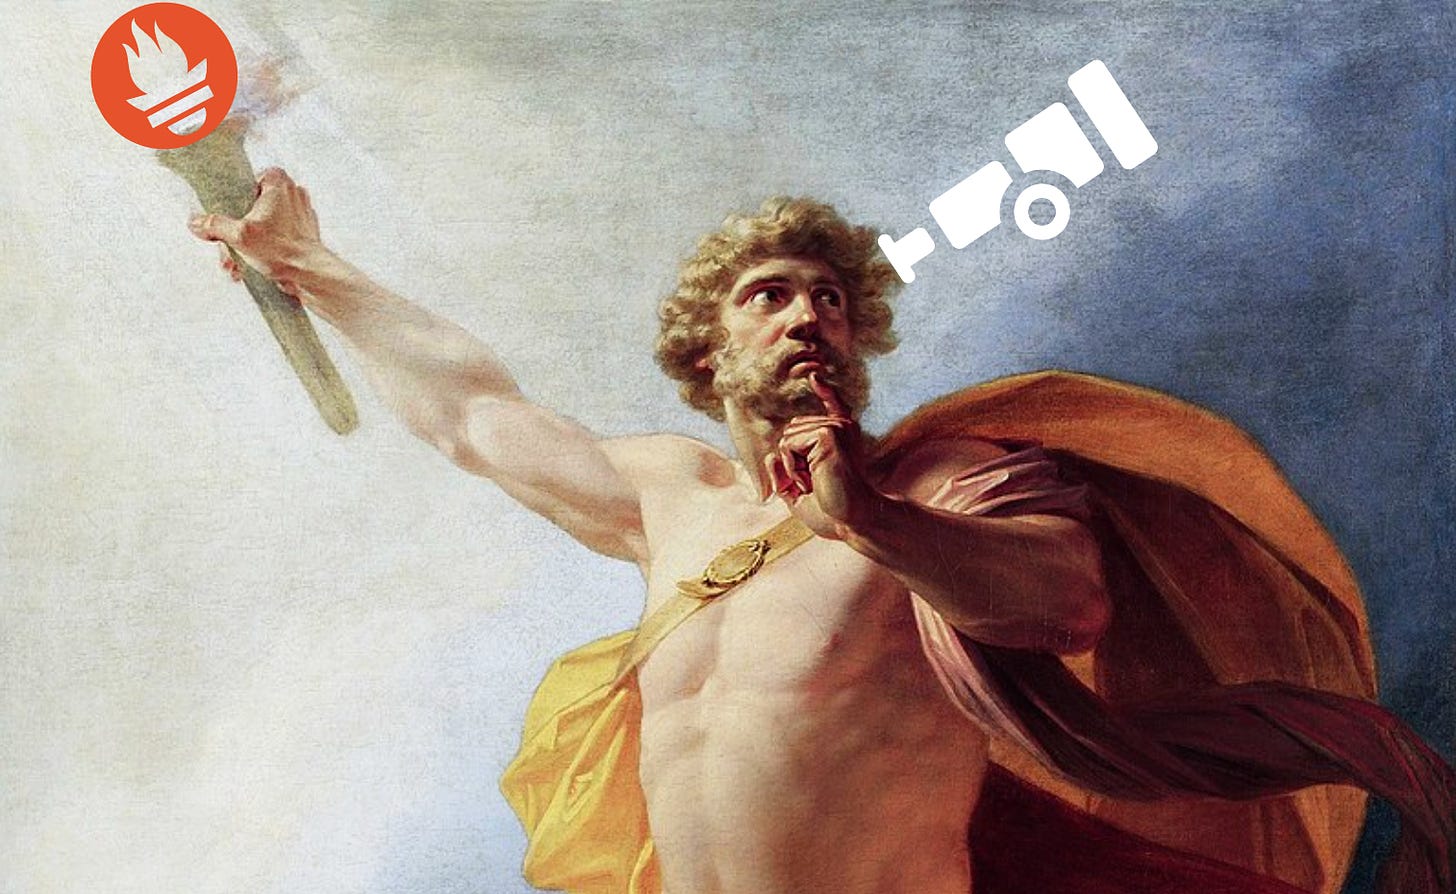 Image of a Greek god holding a torch with the Prometheus logo, and OTel logo